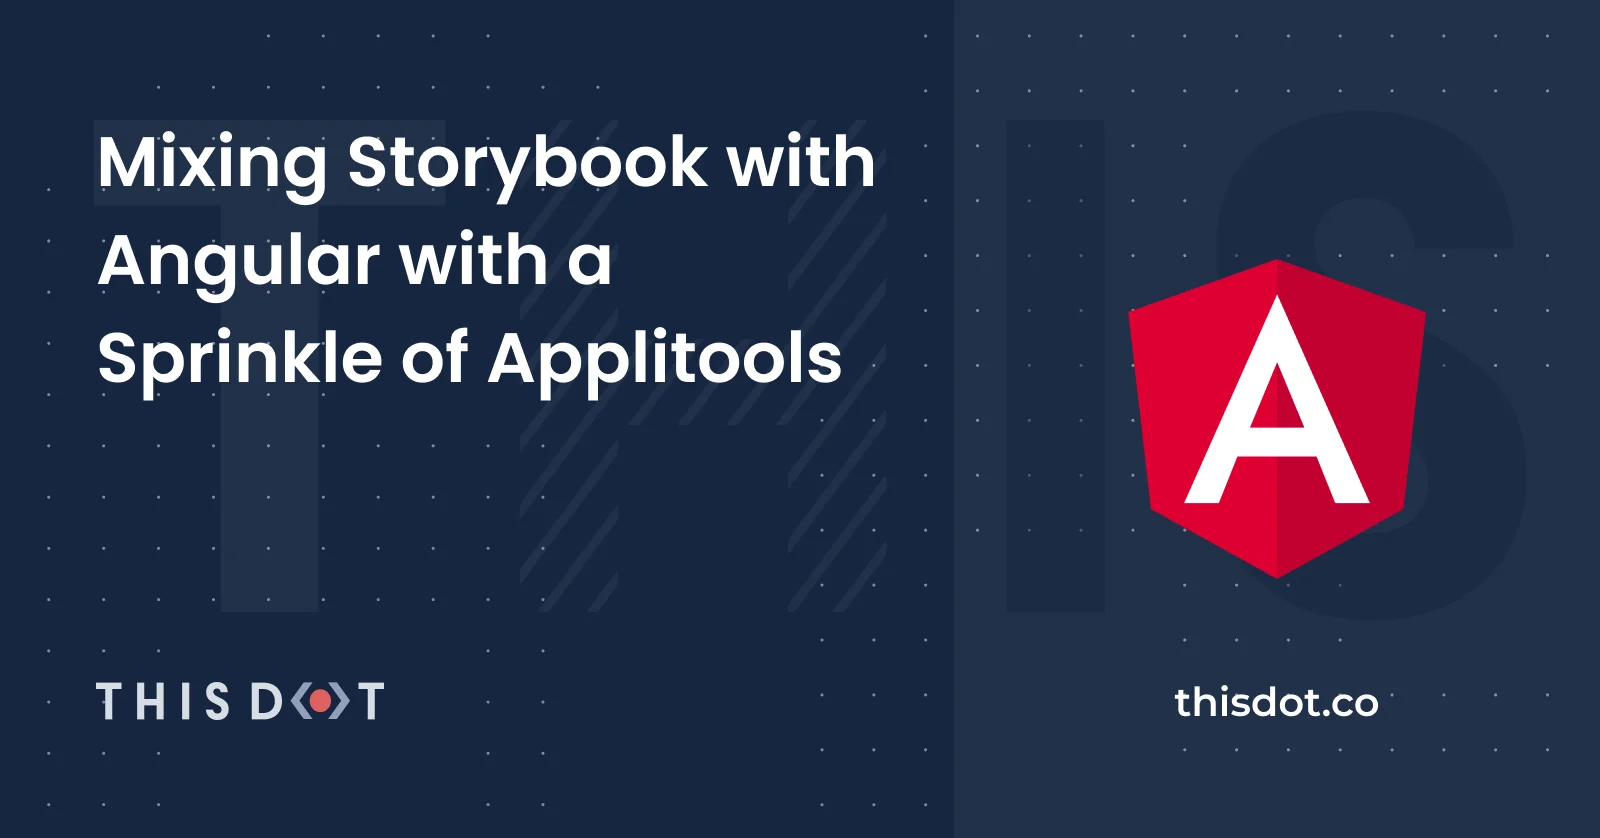 Mixing Storybook with Angular with a Sprinkle of Applitools cover image